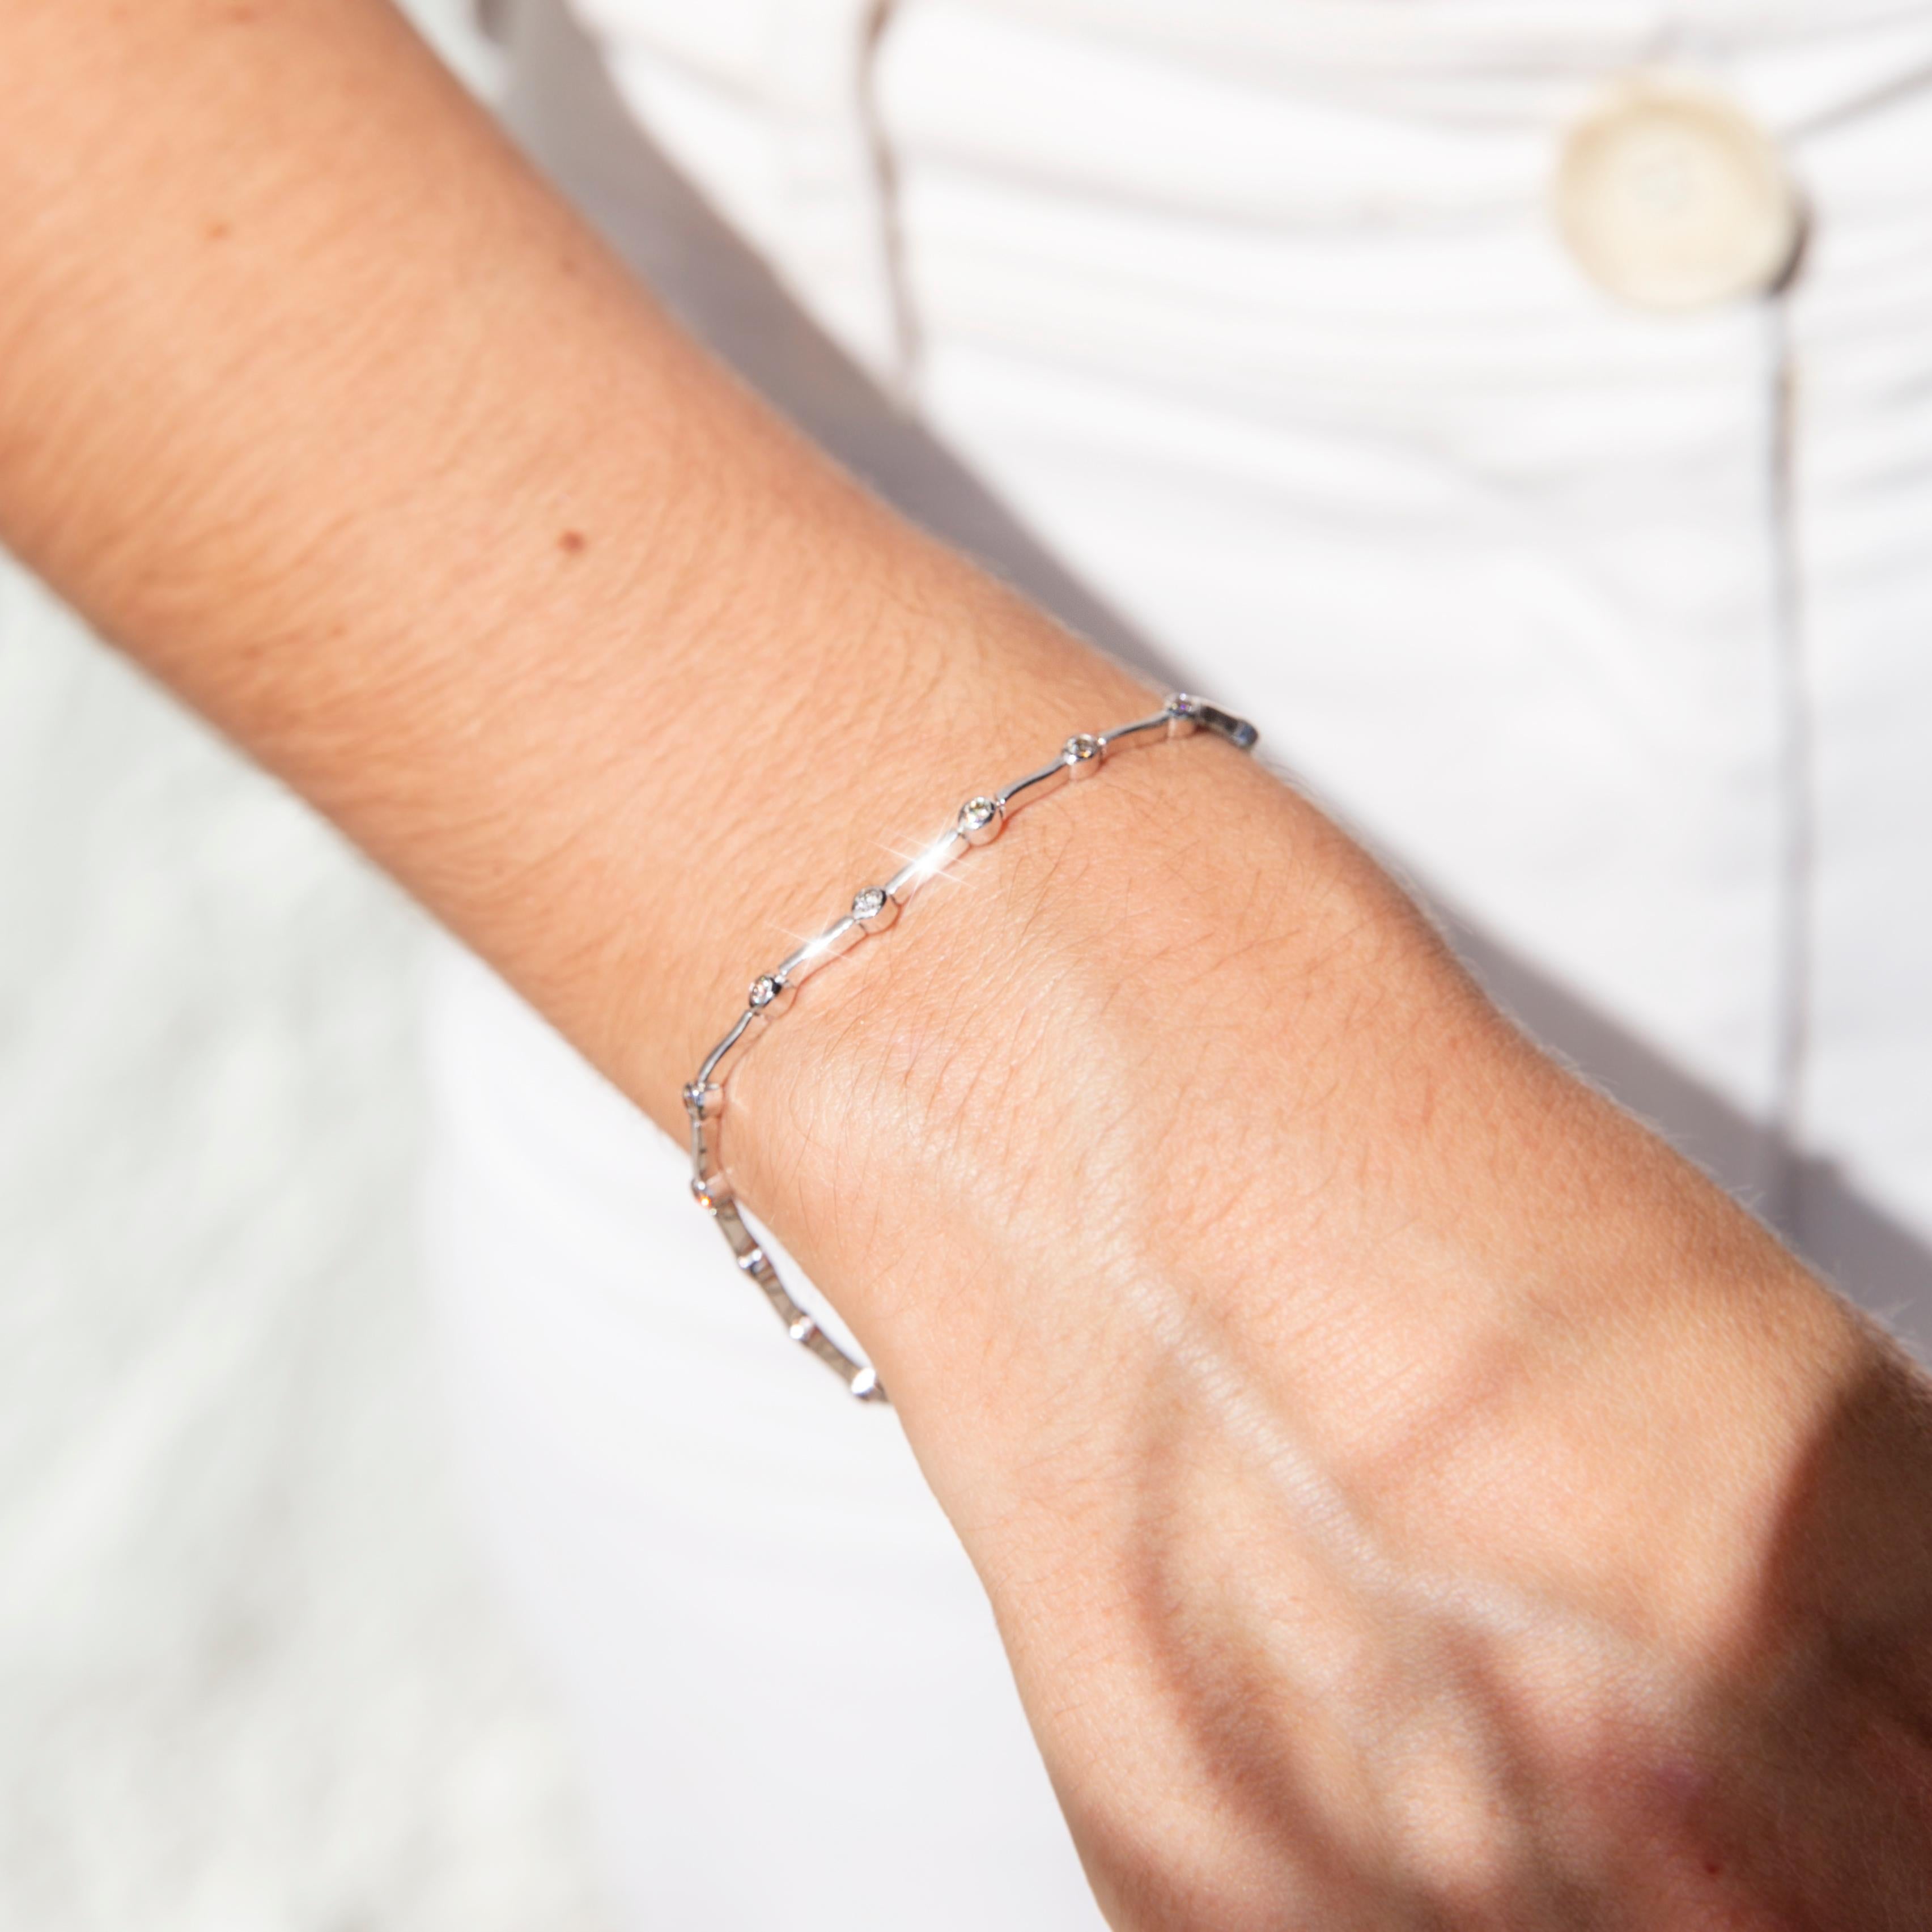 Crafted in 18 carat white gold, this darling vintage tennis bracelet features seventeen shimmering round brilliant cut diamonds in elegant rub over settings, linked with curved white gold bars. We have named her The Kian Bracelet. A wonderful